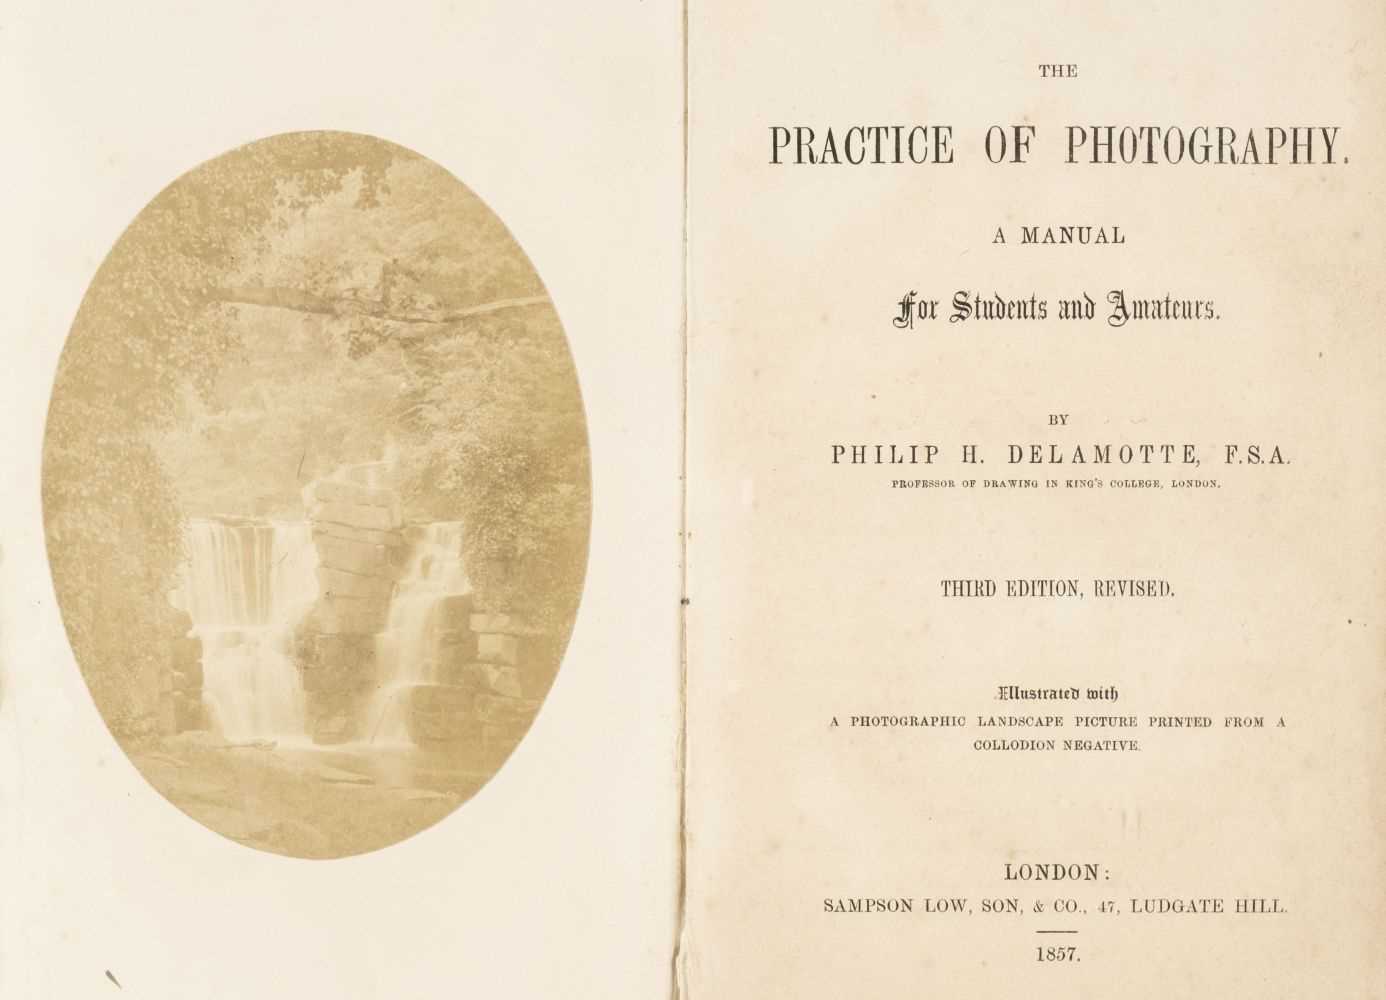 Lot 74 - Delamotte (Philip H.). The Practice of Photography. A Manual for Students and Amateurs